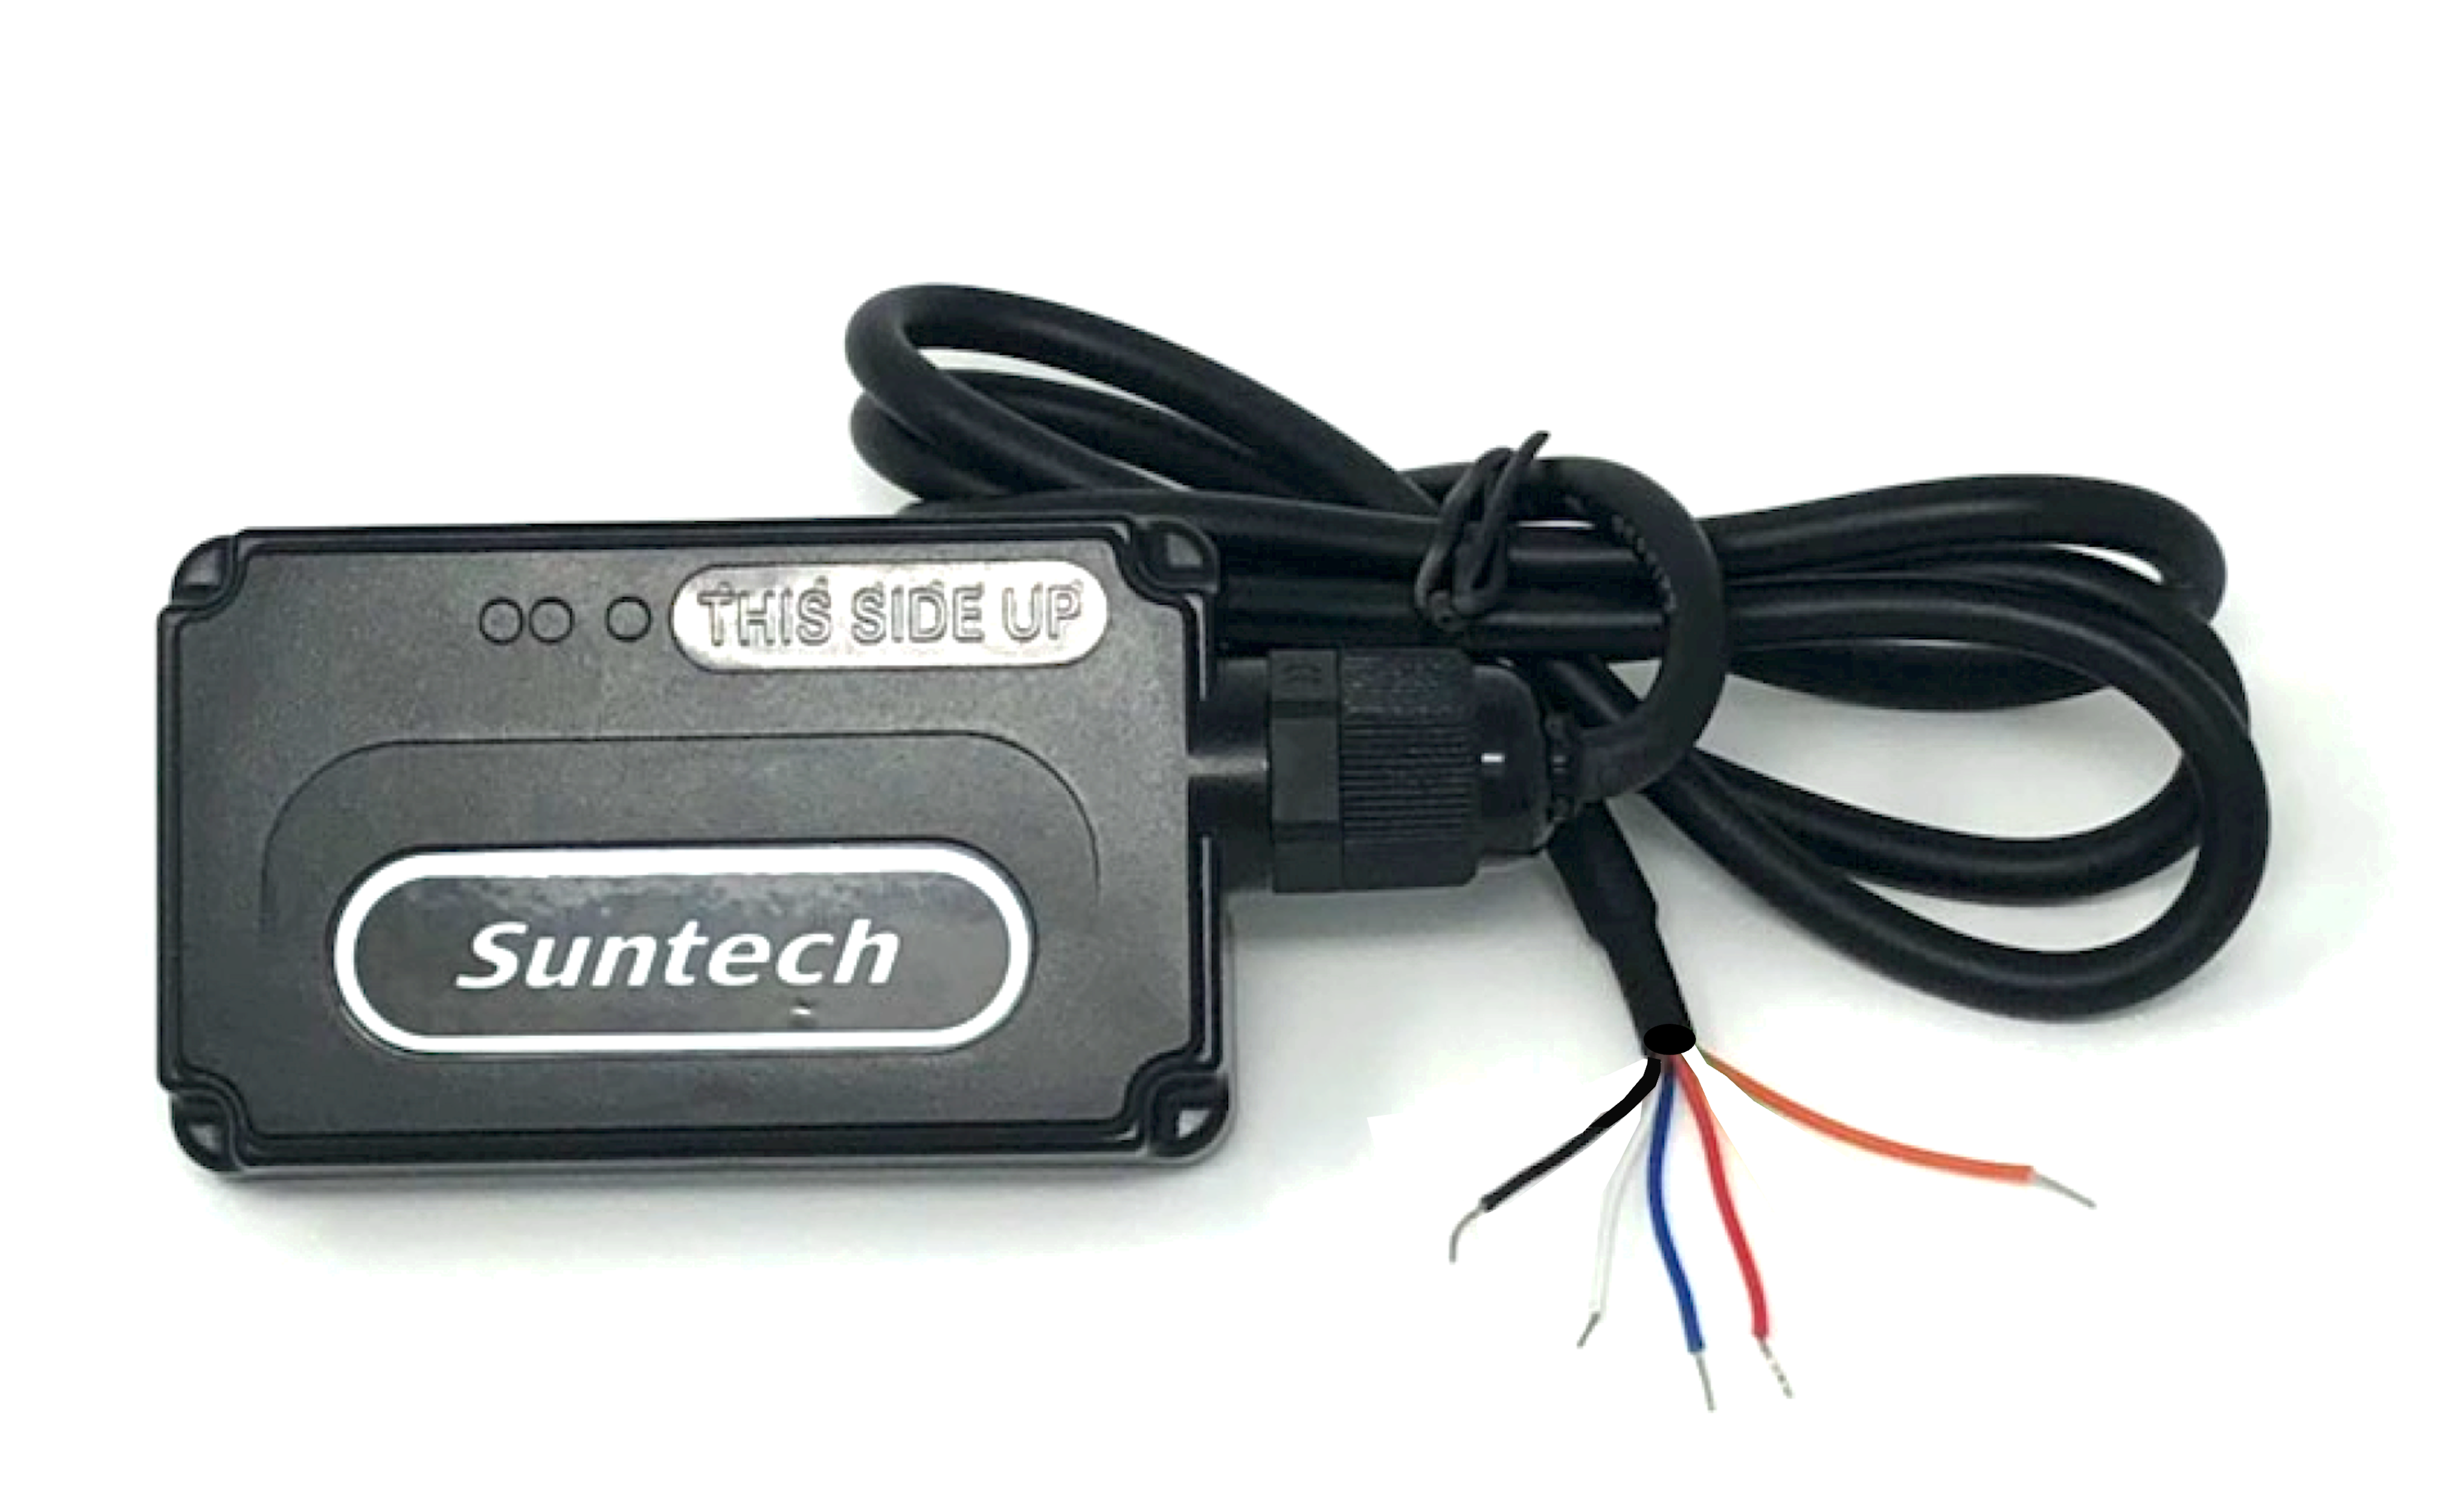 Suntech ST4345LB tracking device supported by GpsGate